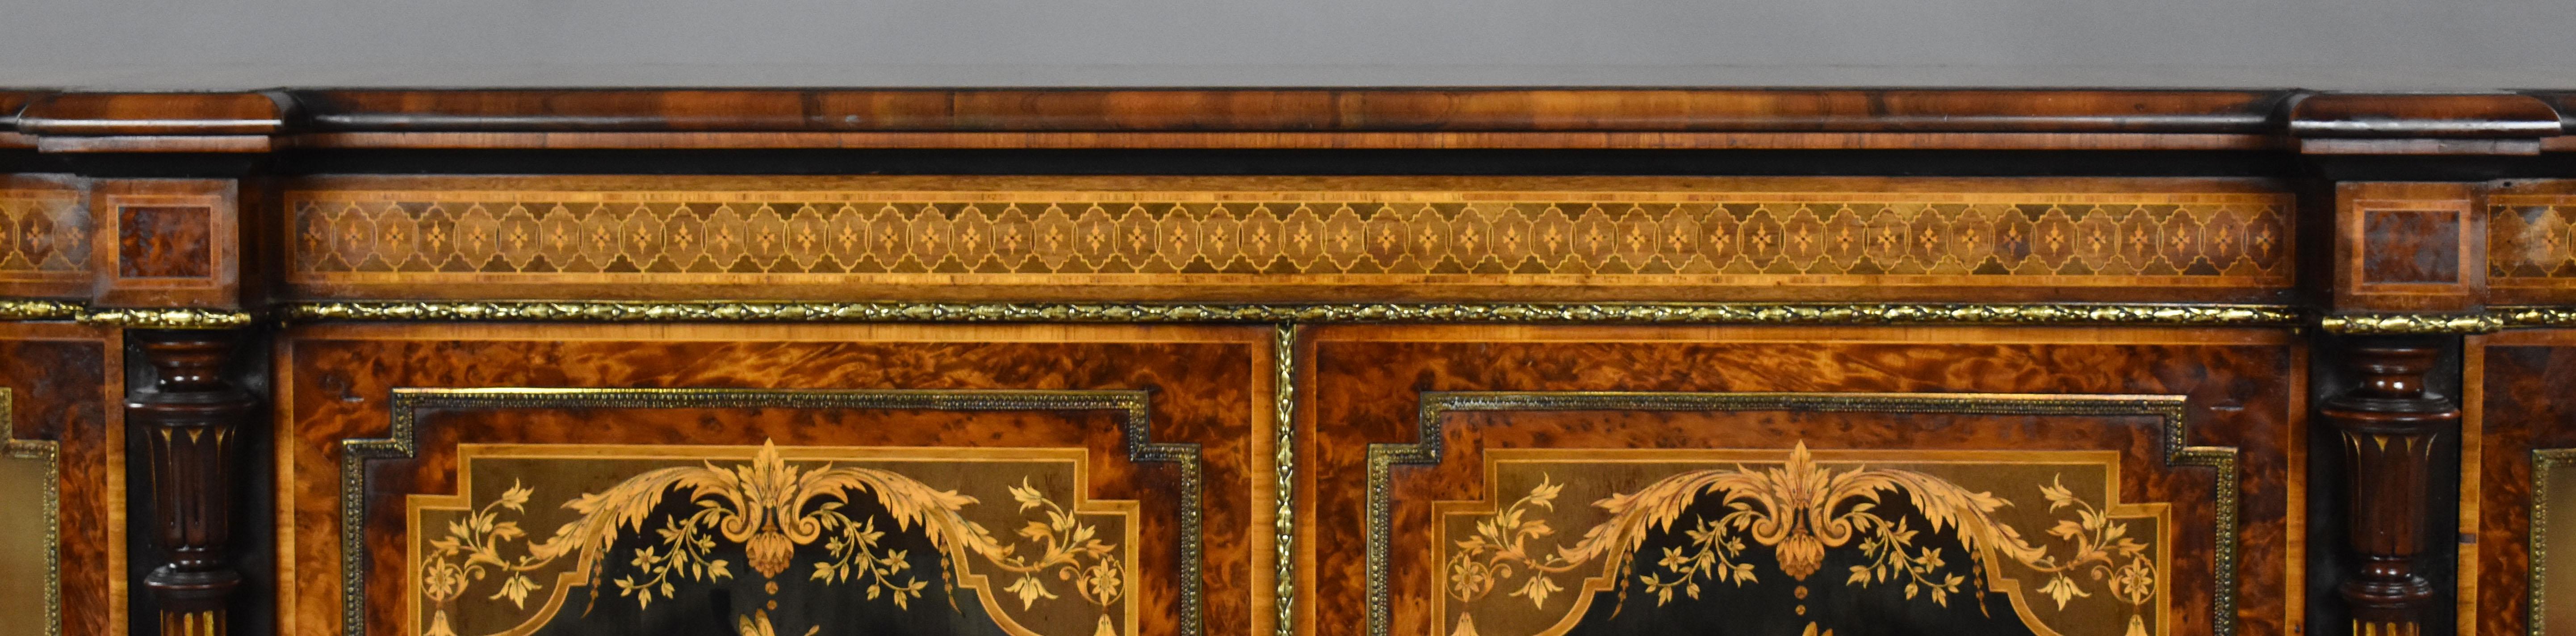 19th Century English Victorian Burl Walnut Marquetry Credenza by Gillow For Sale 4